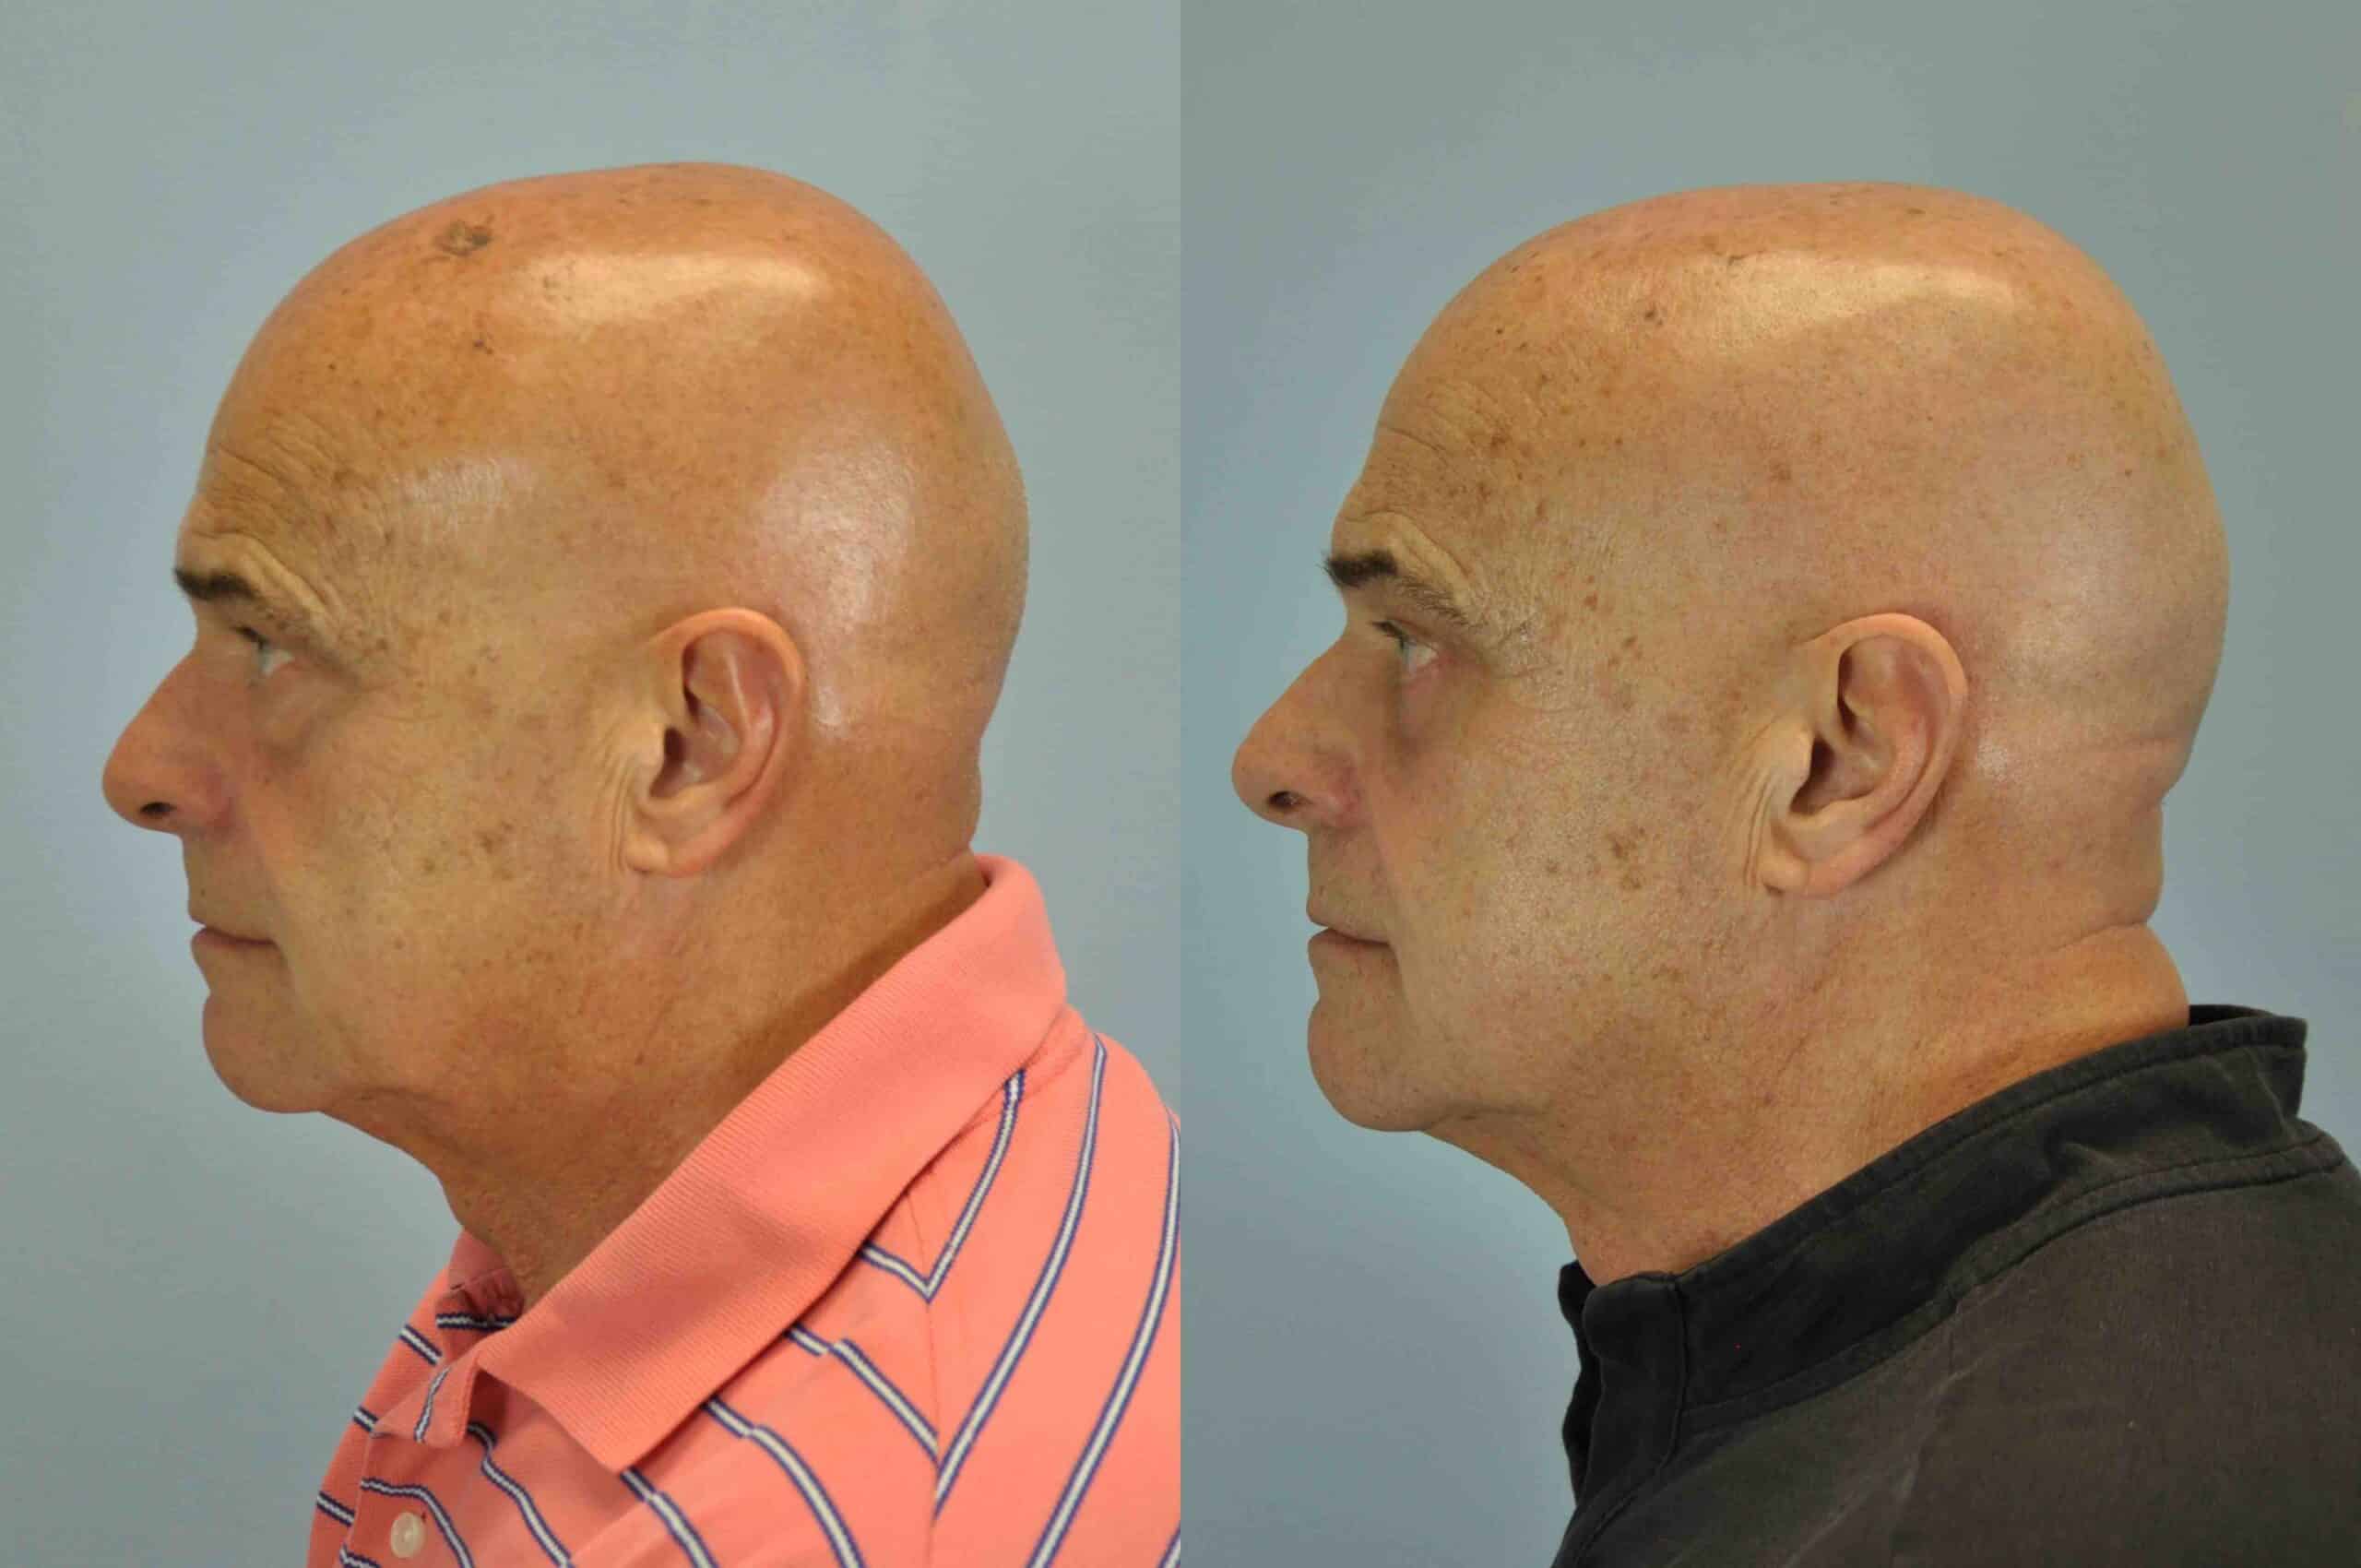 Before and after, 3 mo post op from lower blepharoplasty, canthopexy performed by Dr. Paul Vanek (side view)